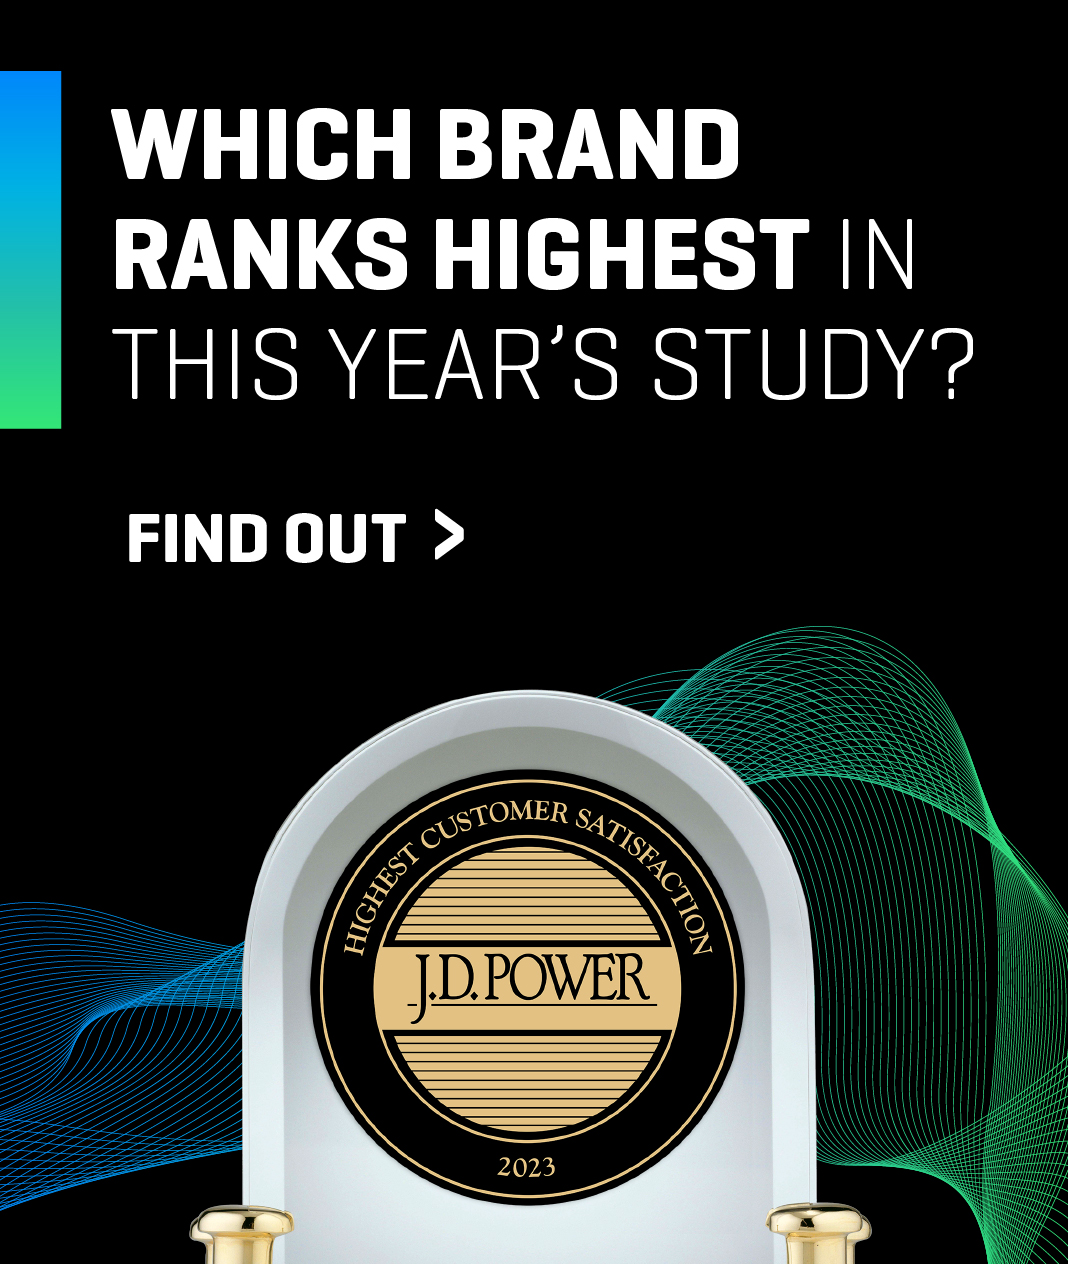 Which brand ranks highest in this year's study?